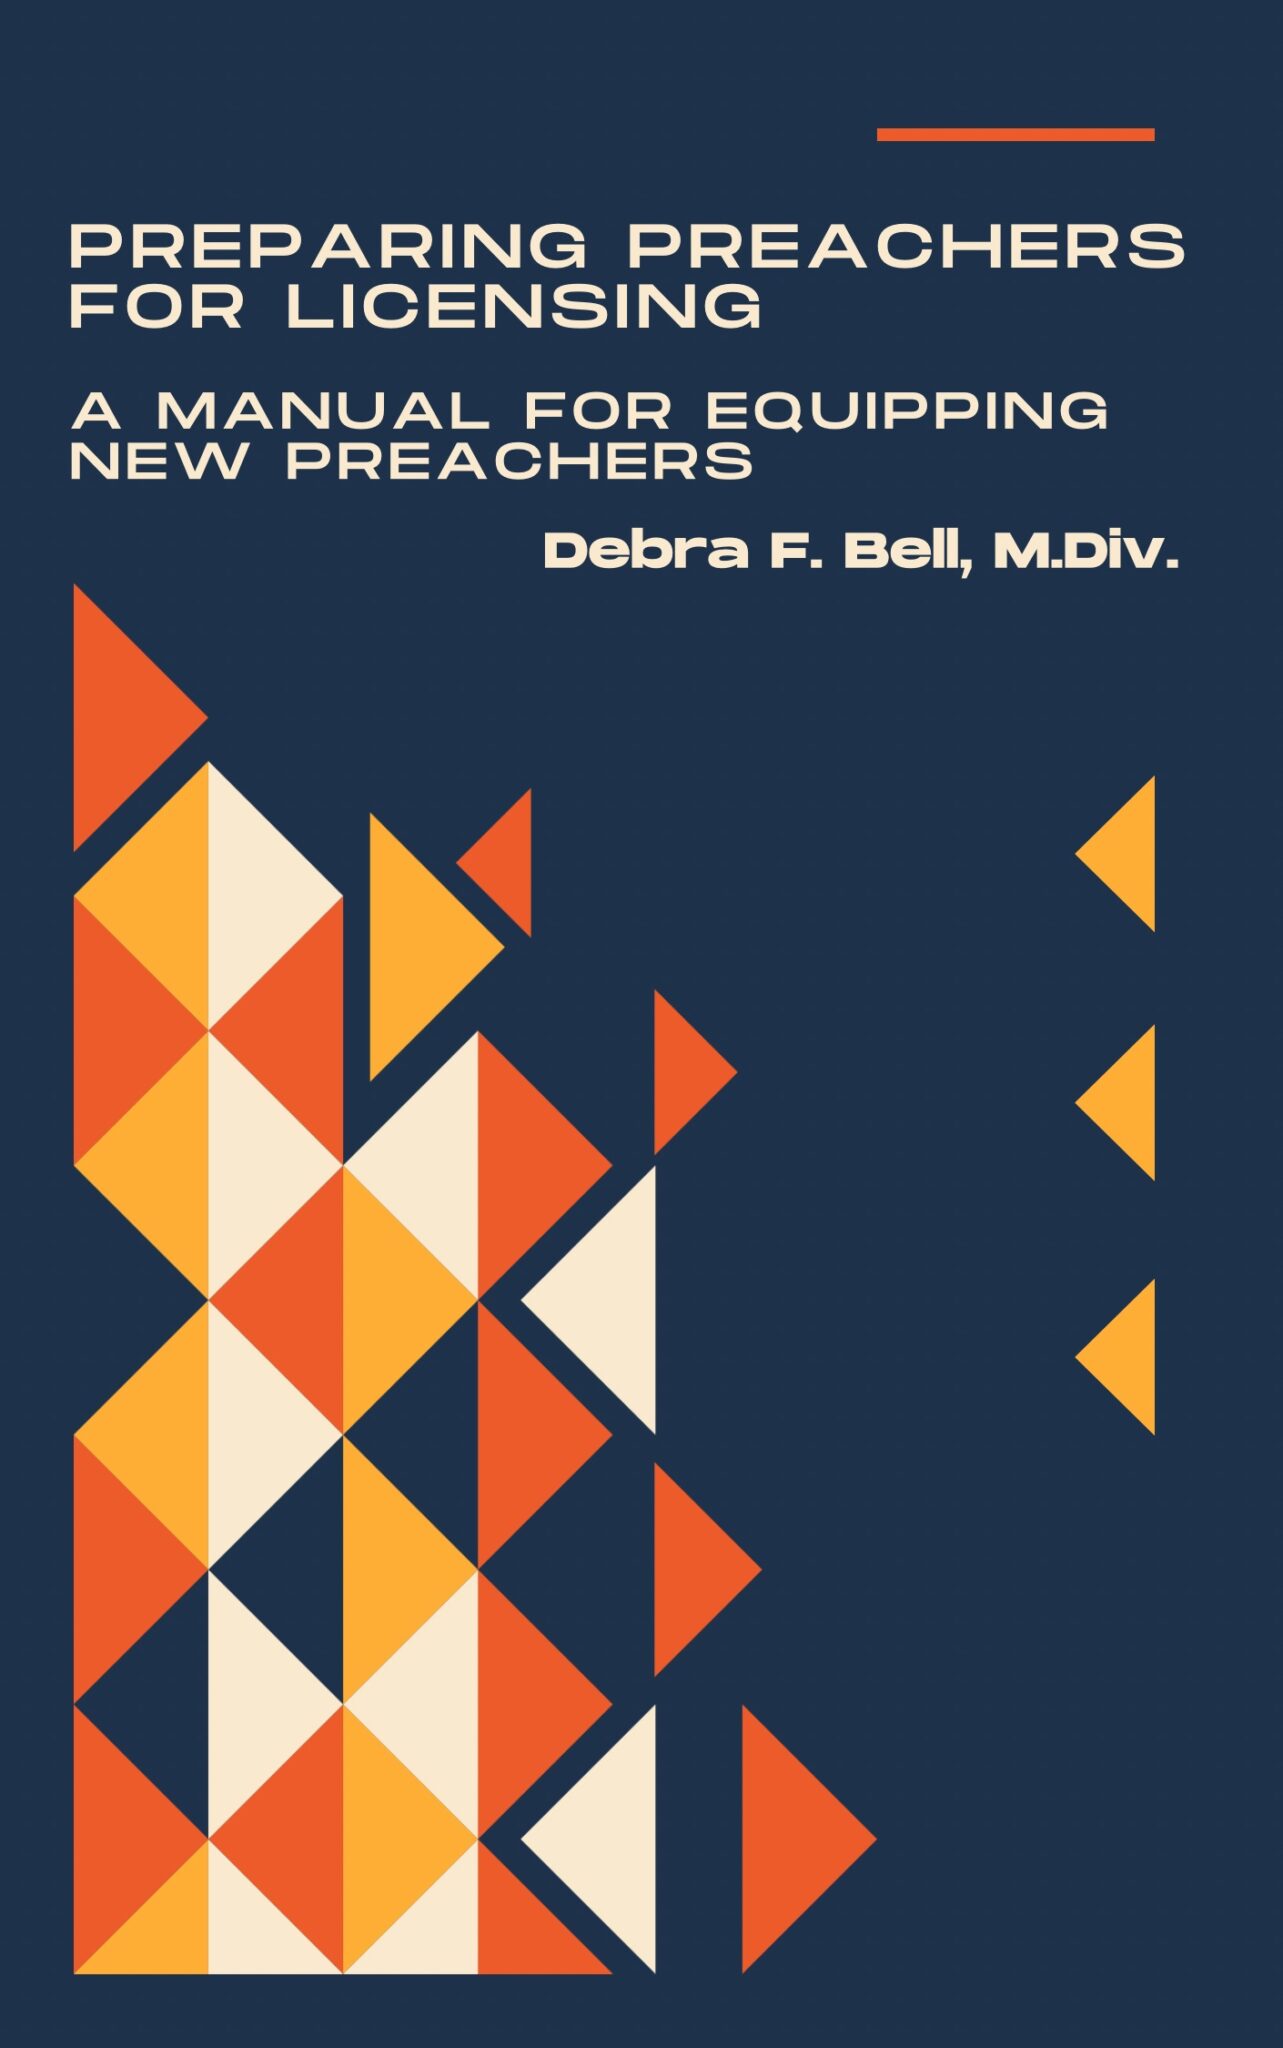 Preparing Preachers for Licensing: A Manual For Equipping New Preachers